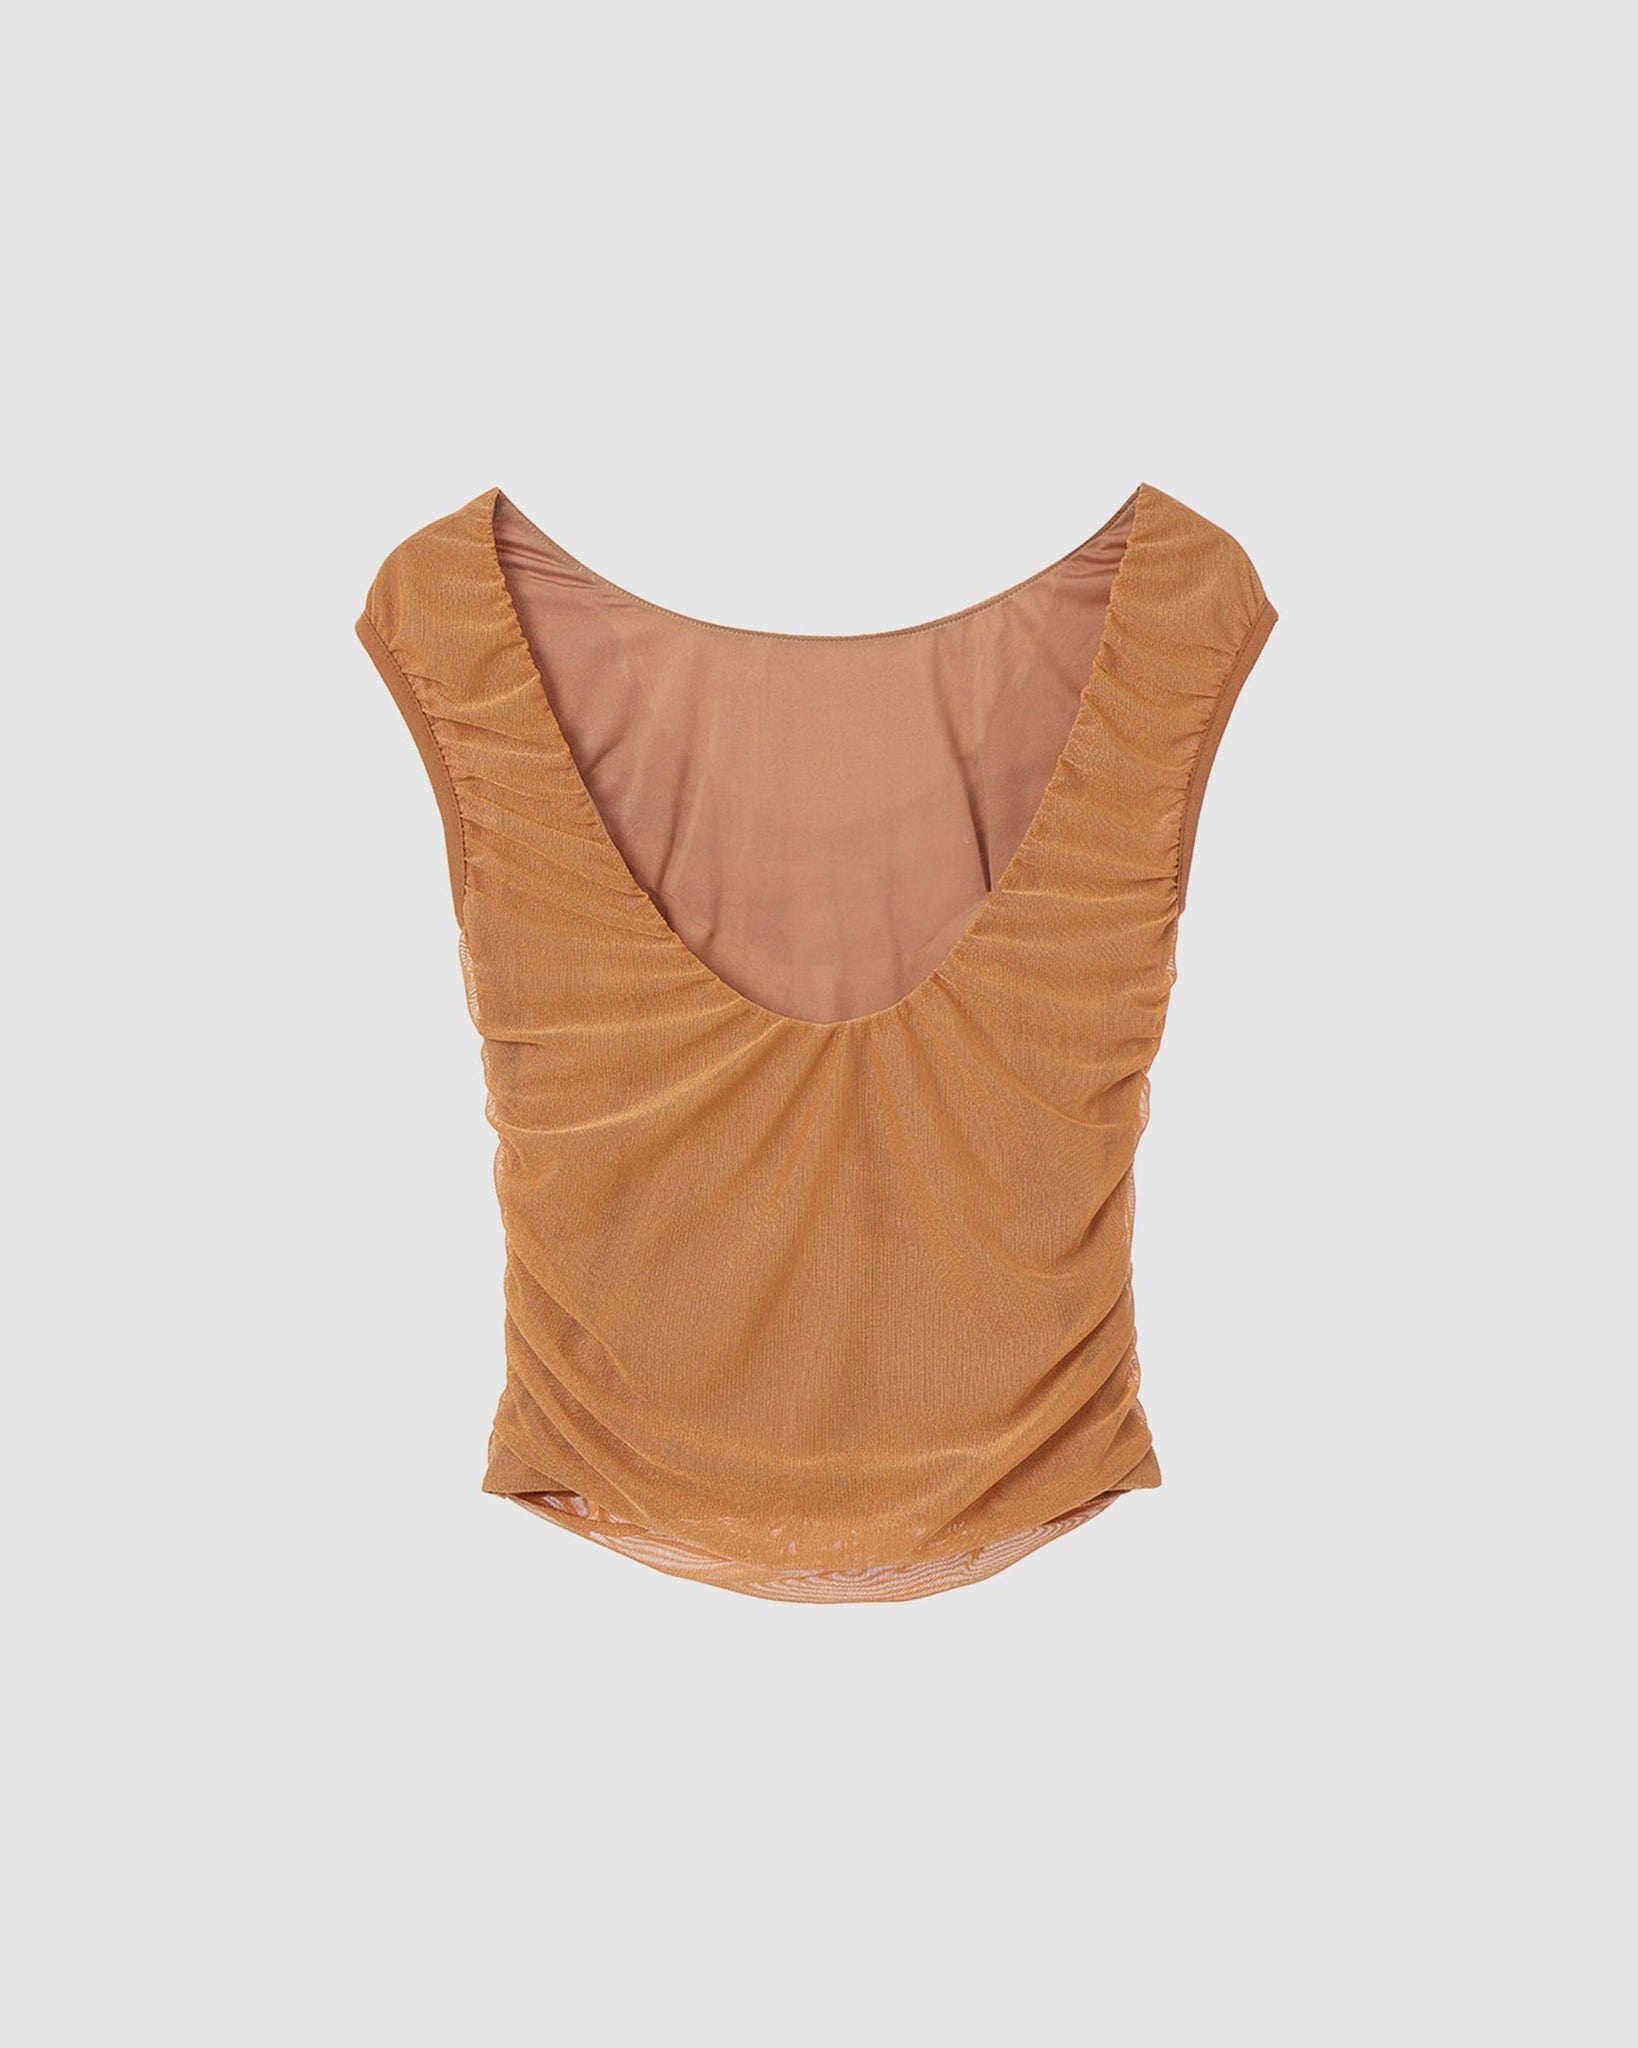 Mesh Draped Top - {{ collection.title }} - Chinatown Country Club 